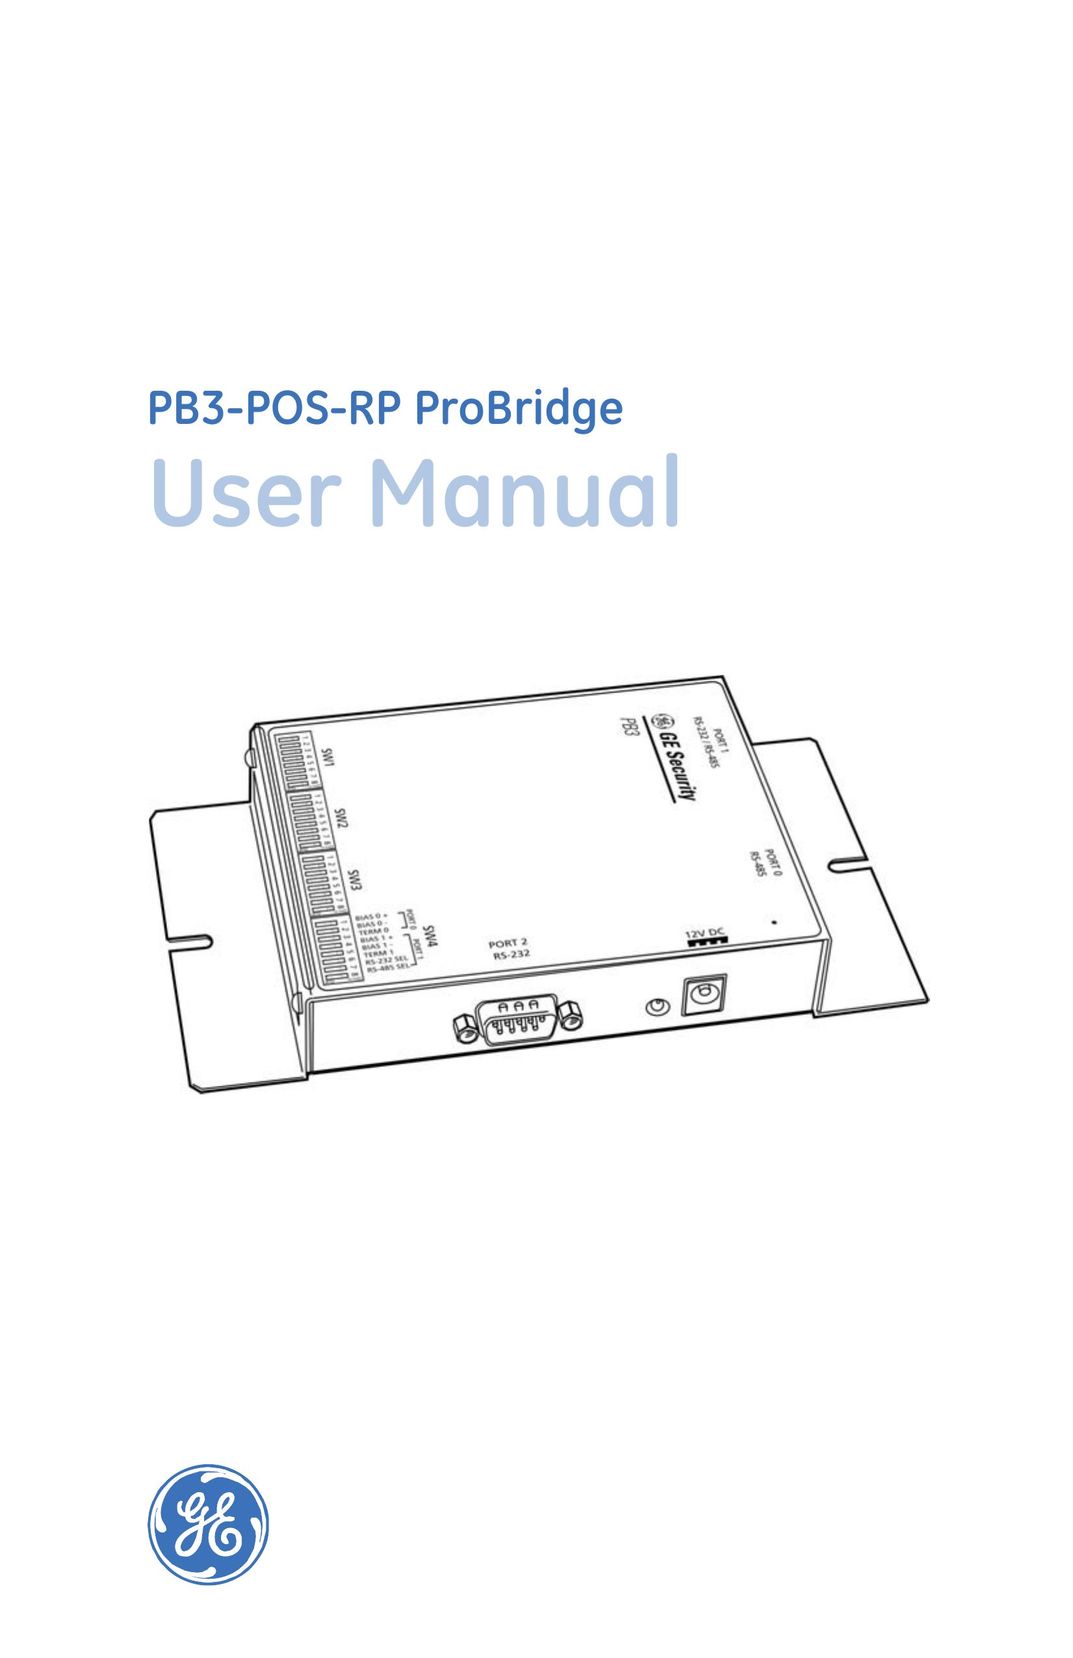 GE PB3-POS-RP Network Router User Manual